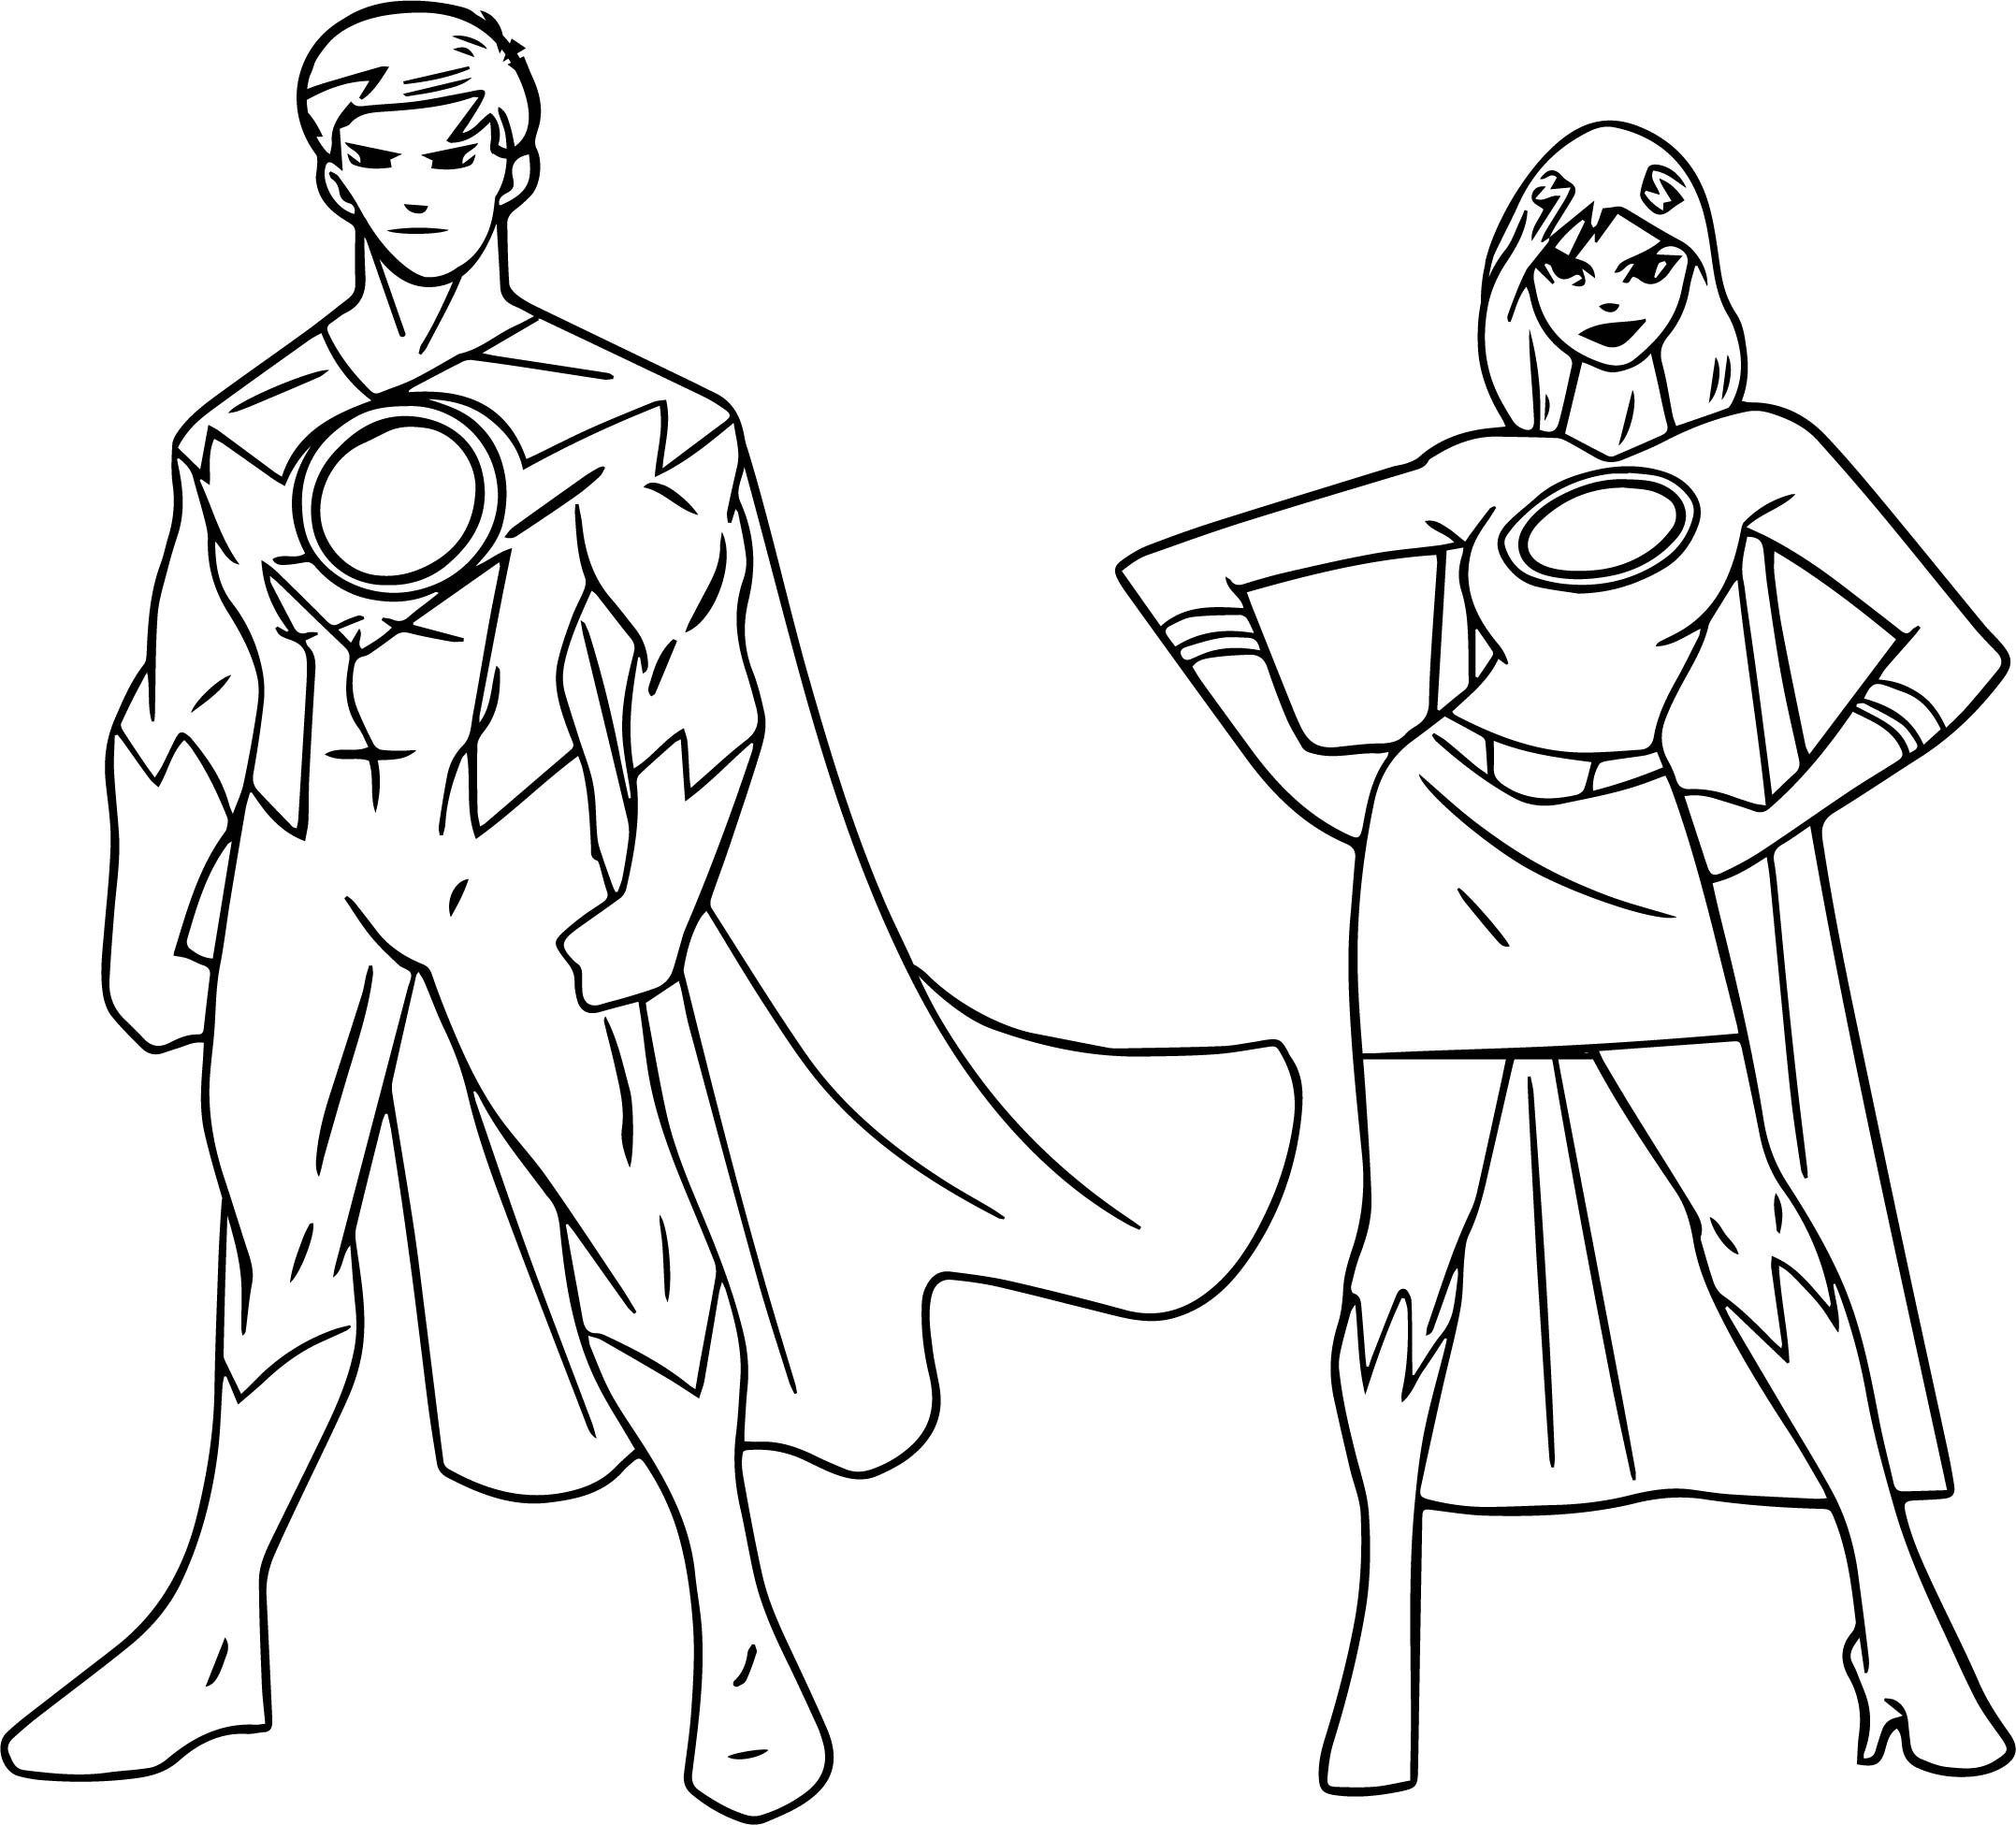 Coloring Pages For Boys Super Heroes
 Powered Superheroes Super Hero Girl Boy Coloring Page